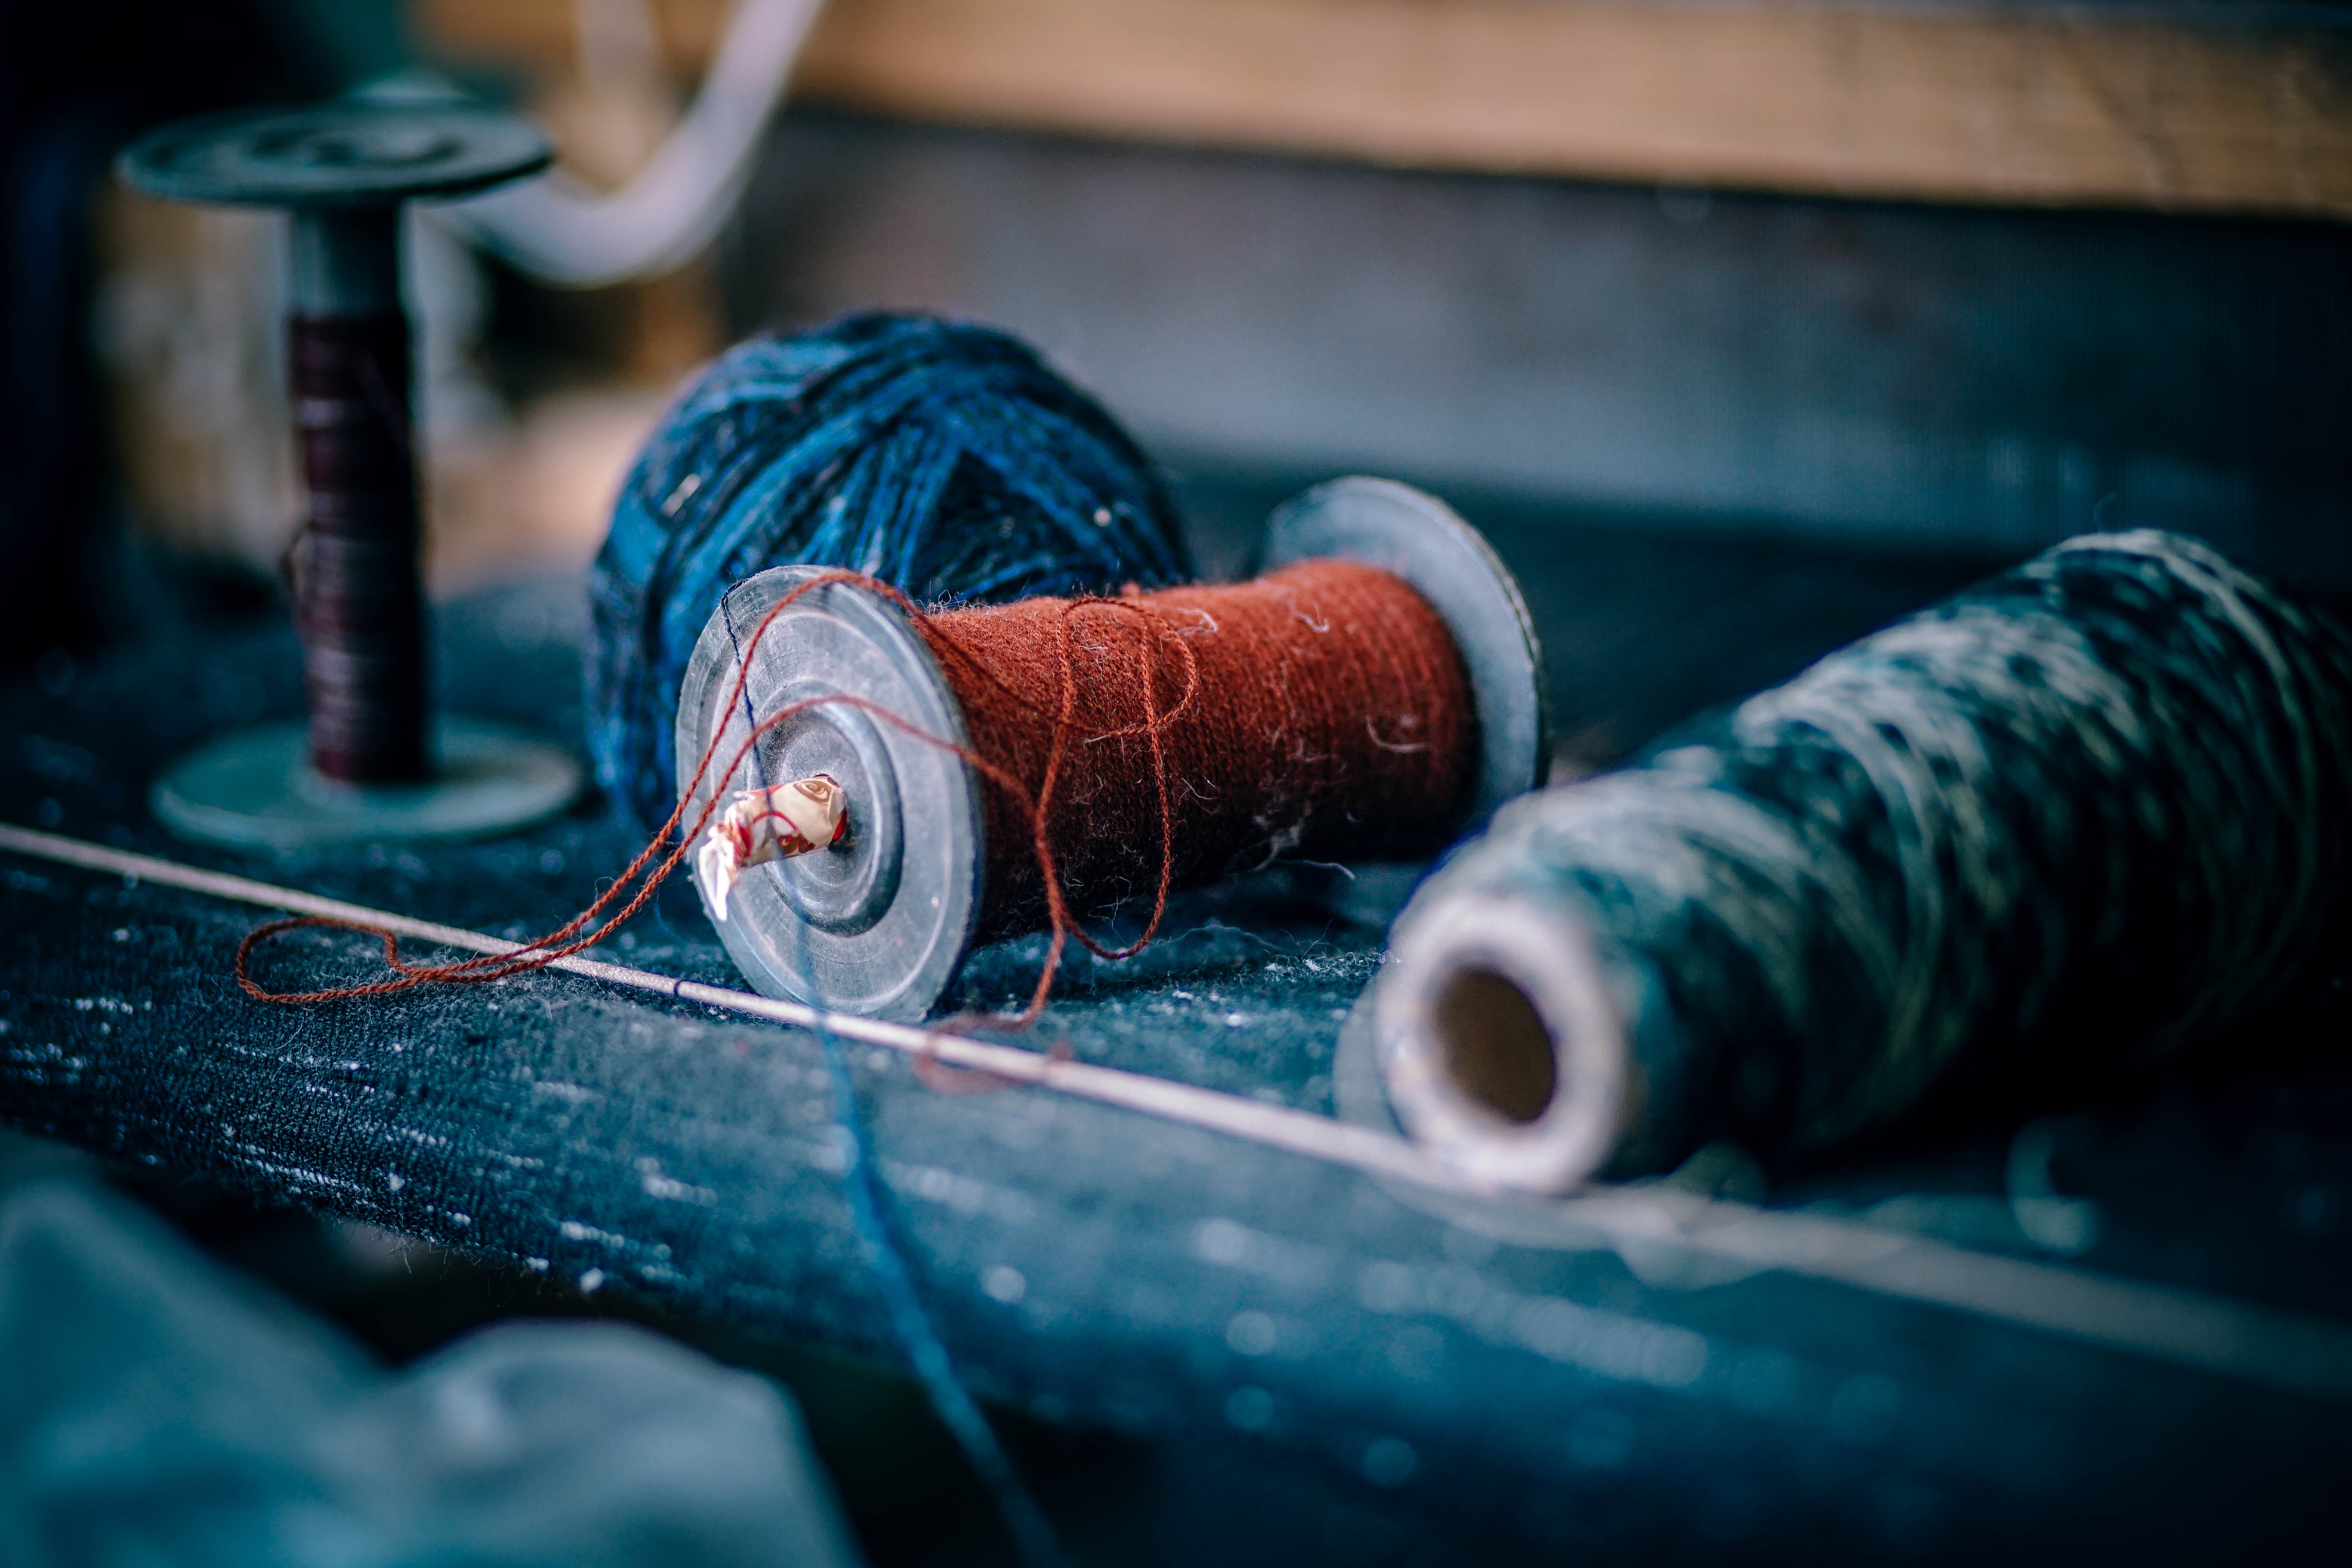 Challenges & Opportunities in Local Textile Production